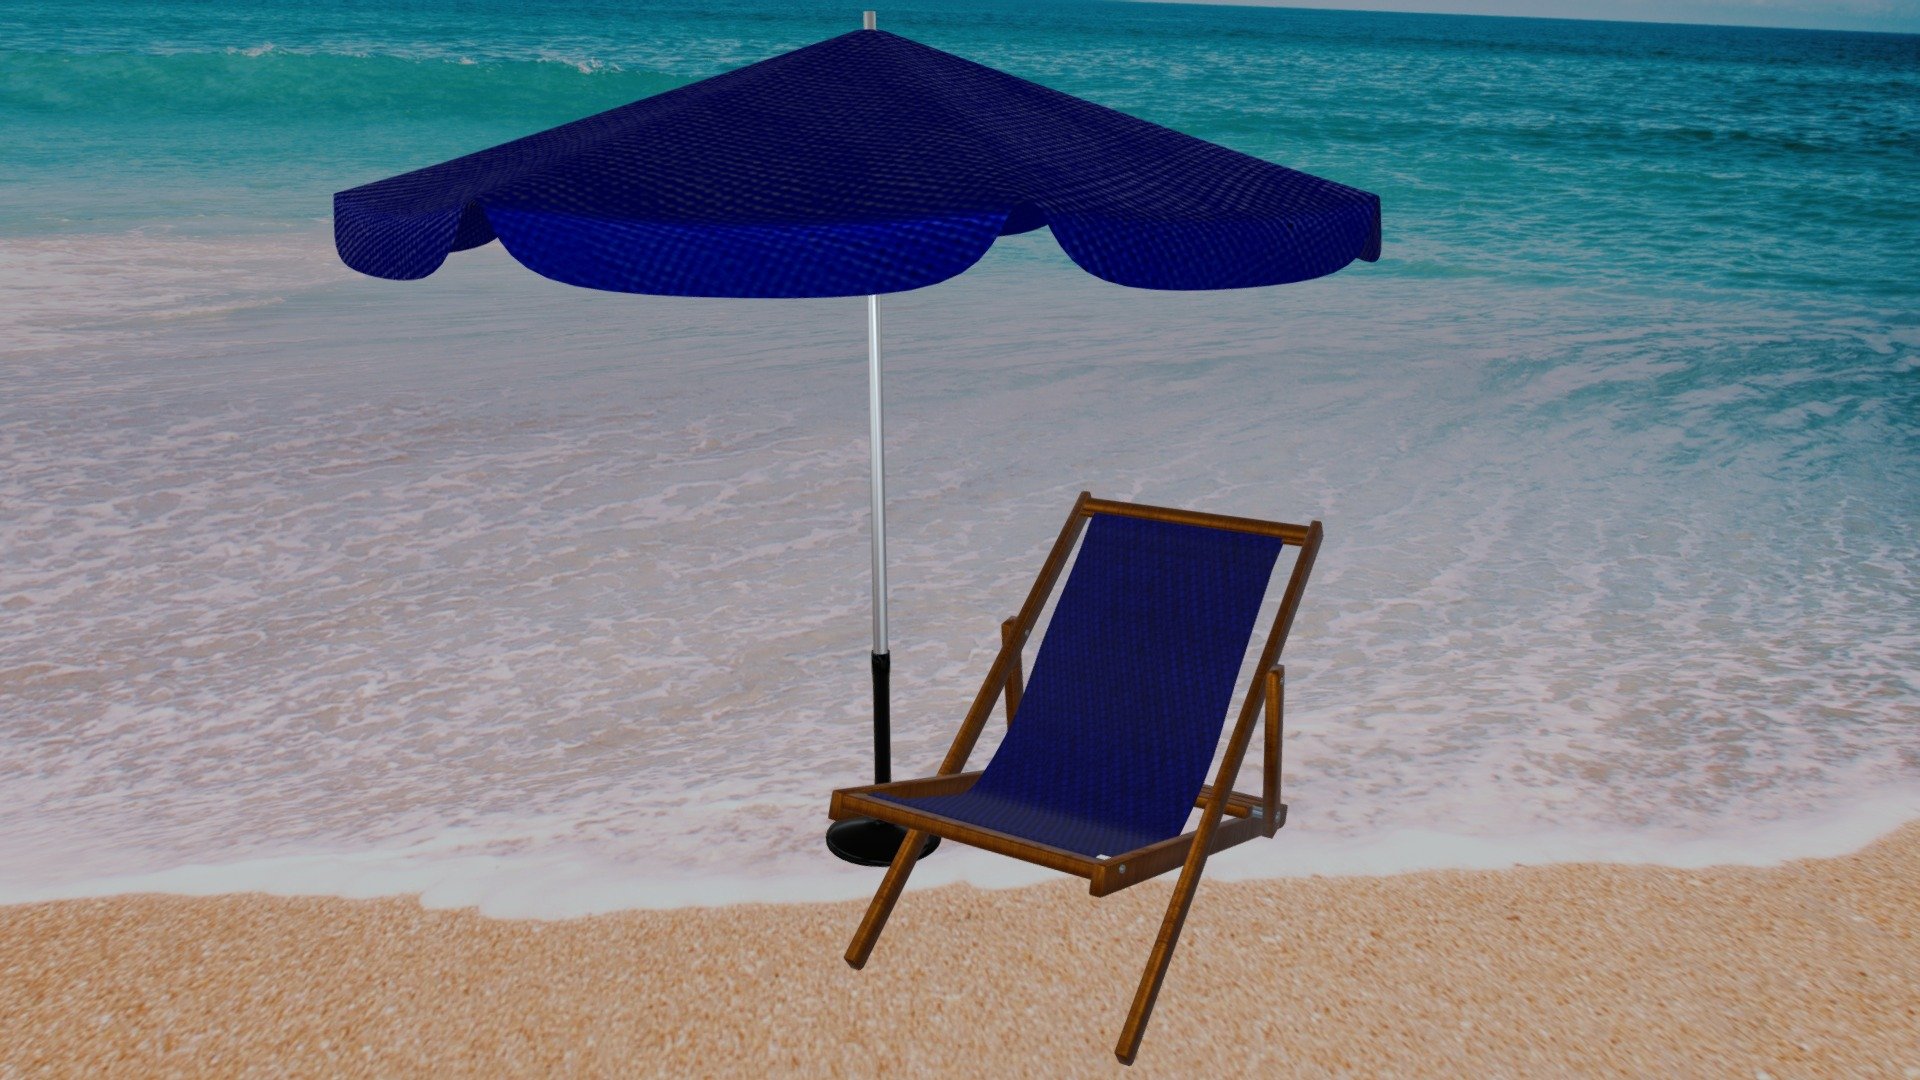 Introducing the Deck Chair &amp; Parasol made by ACBRadio, the programs used to make this object are as follows: Blender 2.92.0, &amp; G.I.M.P 2.10.4…The ‘Textures’ inclued in this object are the following: Normal, Diffuse, Roughness, Displasment, Opacity, Metalness…Textures are obtained from https://cc0textures.com/list?sort=Popular …free of Charge

Backdrop image by Aaron Ulsh over on https://www.pexels.com

:D - Deck Chair & Parasol FBX Low Poly FREE - Download Free 3D model by LordSamueliSolo (@LadyLionStudios) 3d model